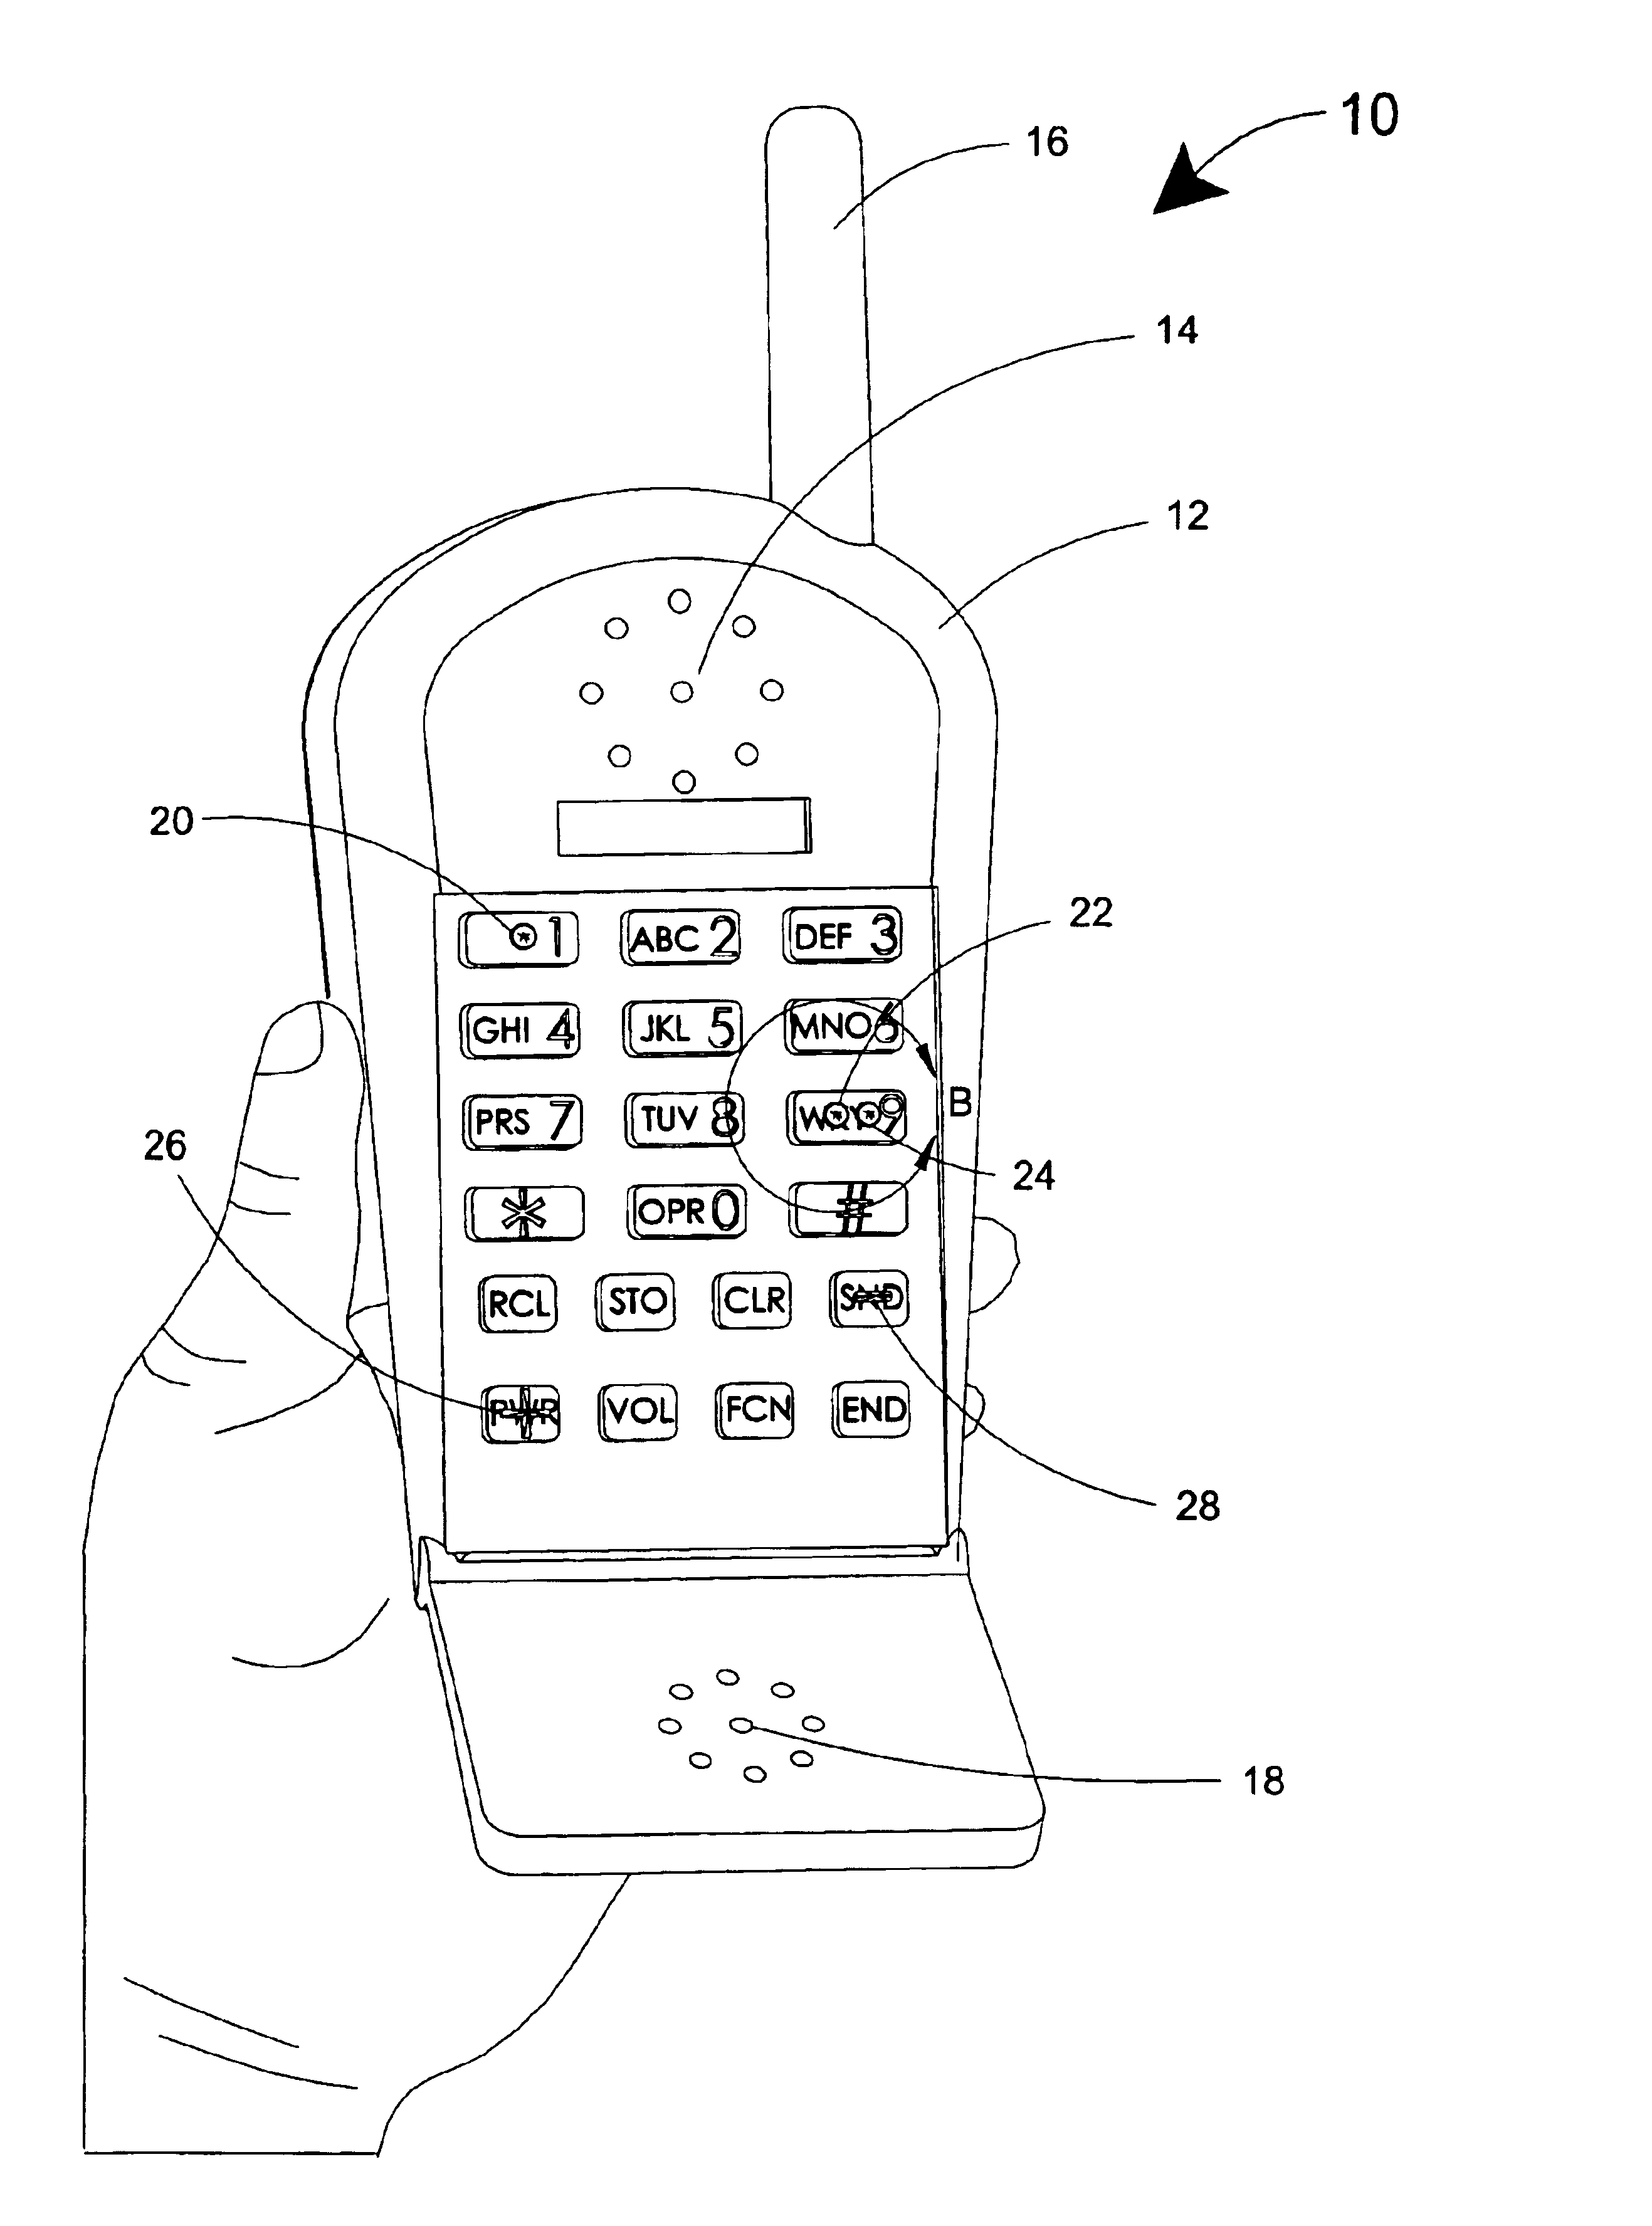 Telephone adapted for emergency dialing by touch